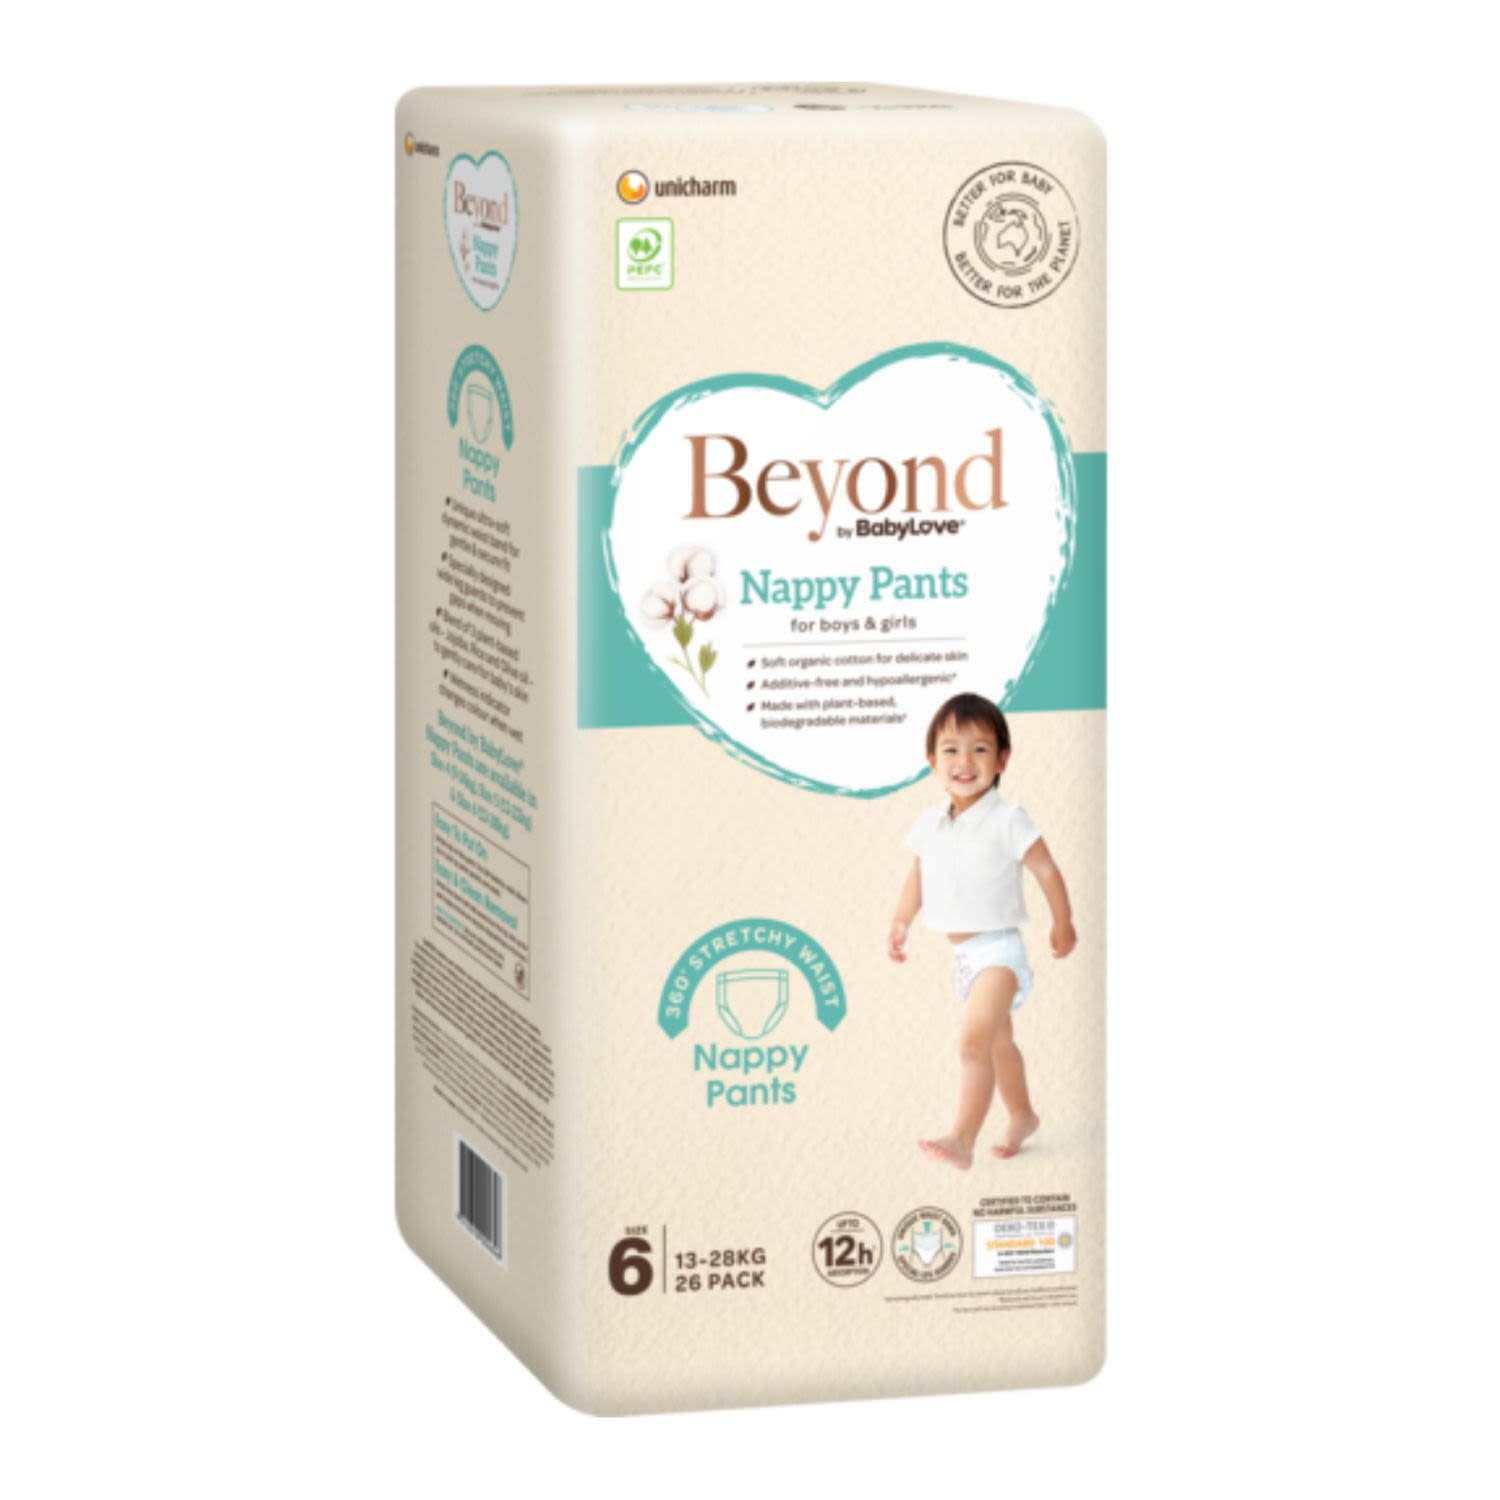 BabyLove Beyond Nappy Pants Size 6 Junior For Boys & Girls , 26 Each